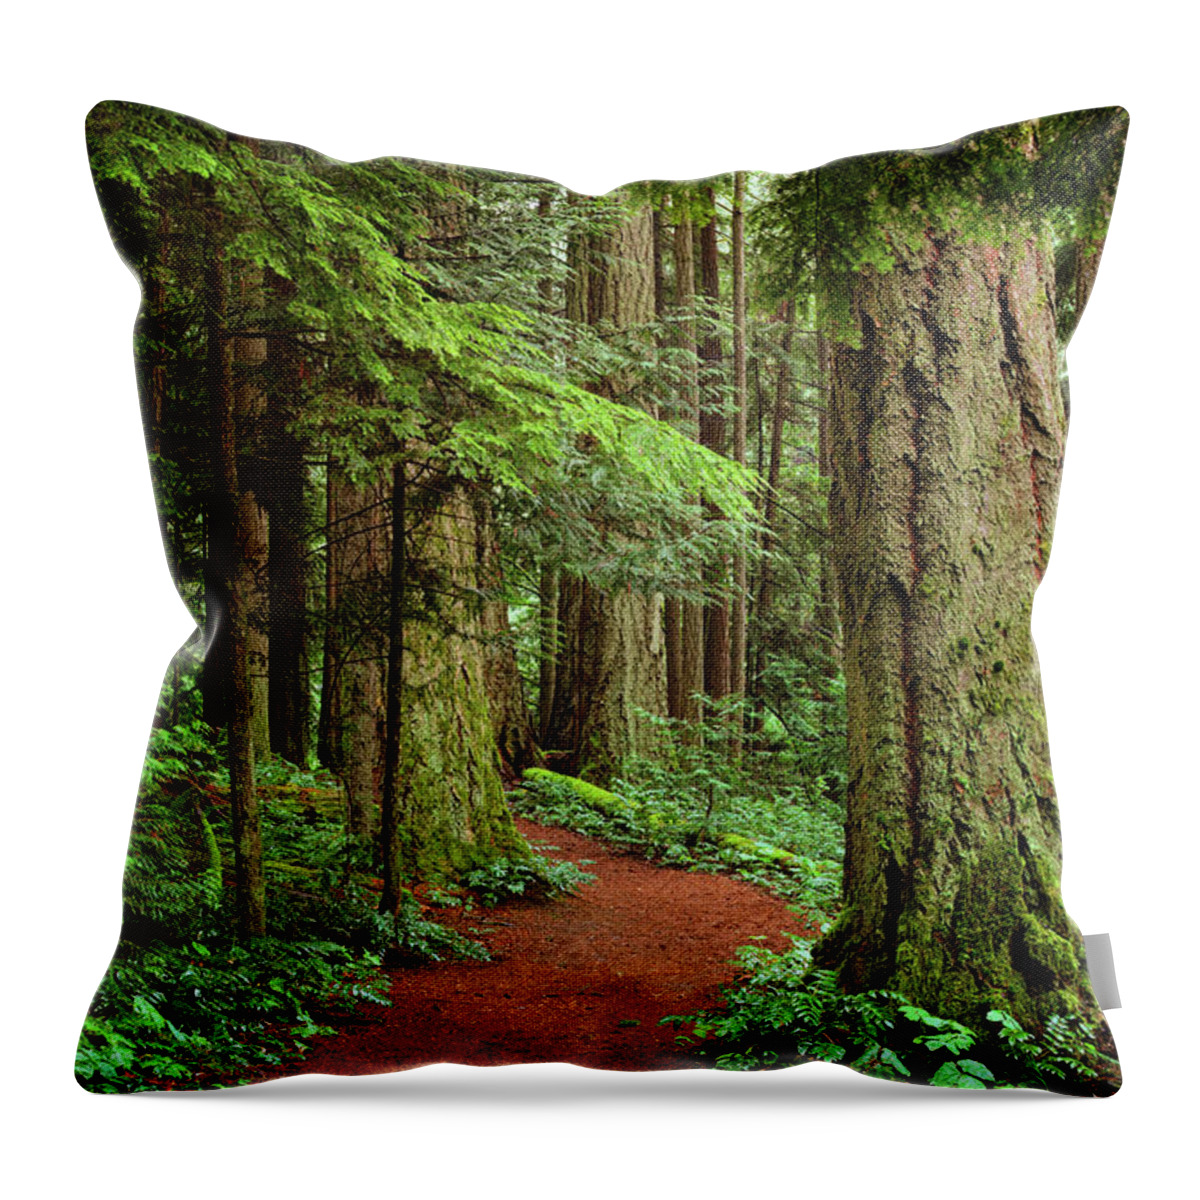 Forest Throw Pillow featuring the photograph Heritage Forest 2 by Randy Hall